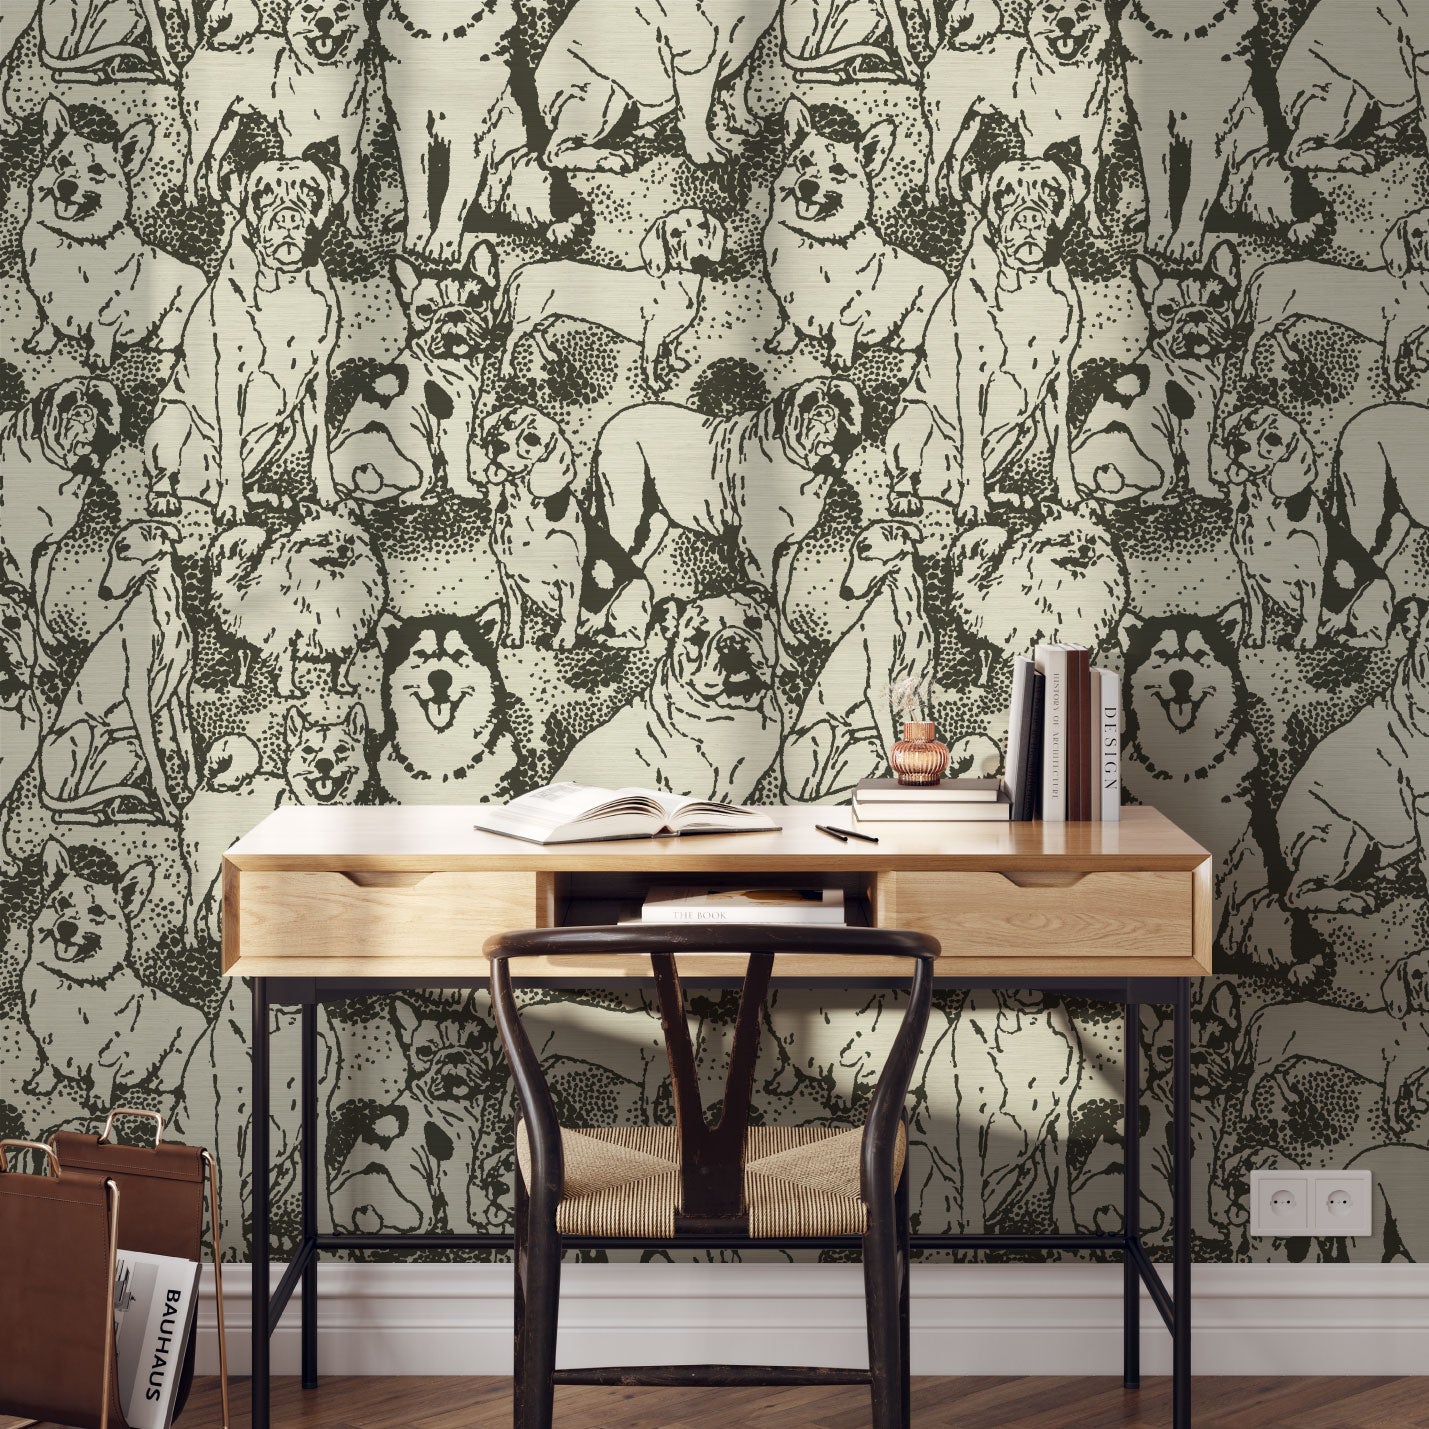 dog printed grasscloth wallpaper puppy huskie, bulldogs, mastiff, wiener, beagles, yorkie Natural Textured Eco-Friendly Non-toxic High-quality Sustainable Interior Design Bold Custom kids mudroom veterinary grooming animal neutral cream black white office study desk